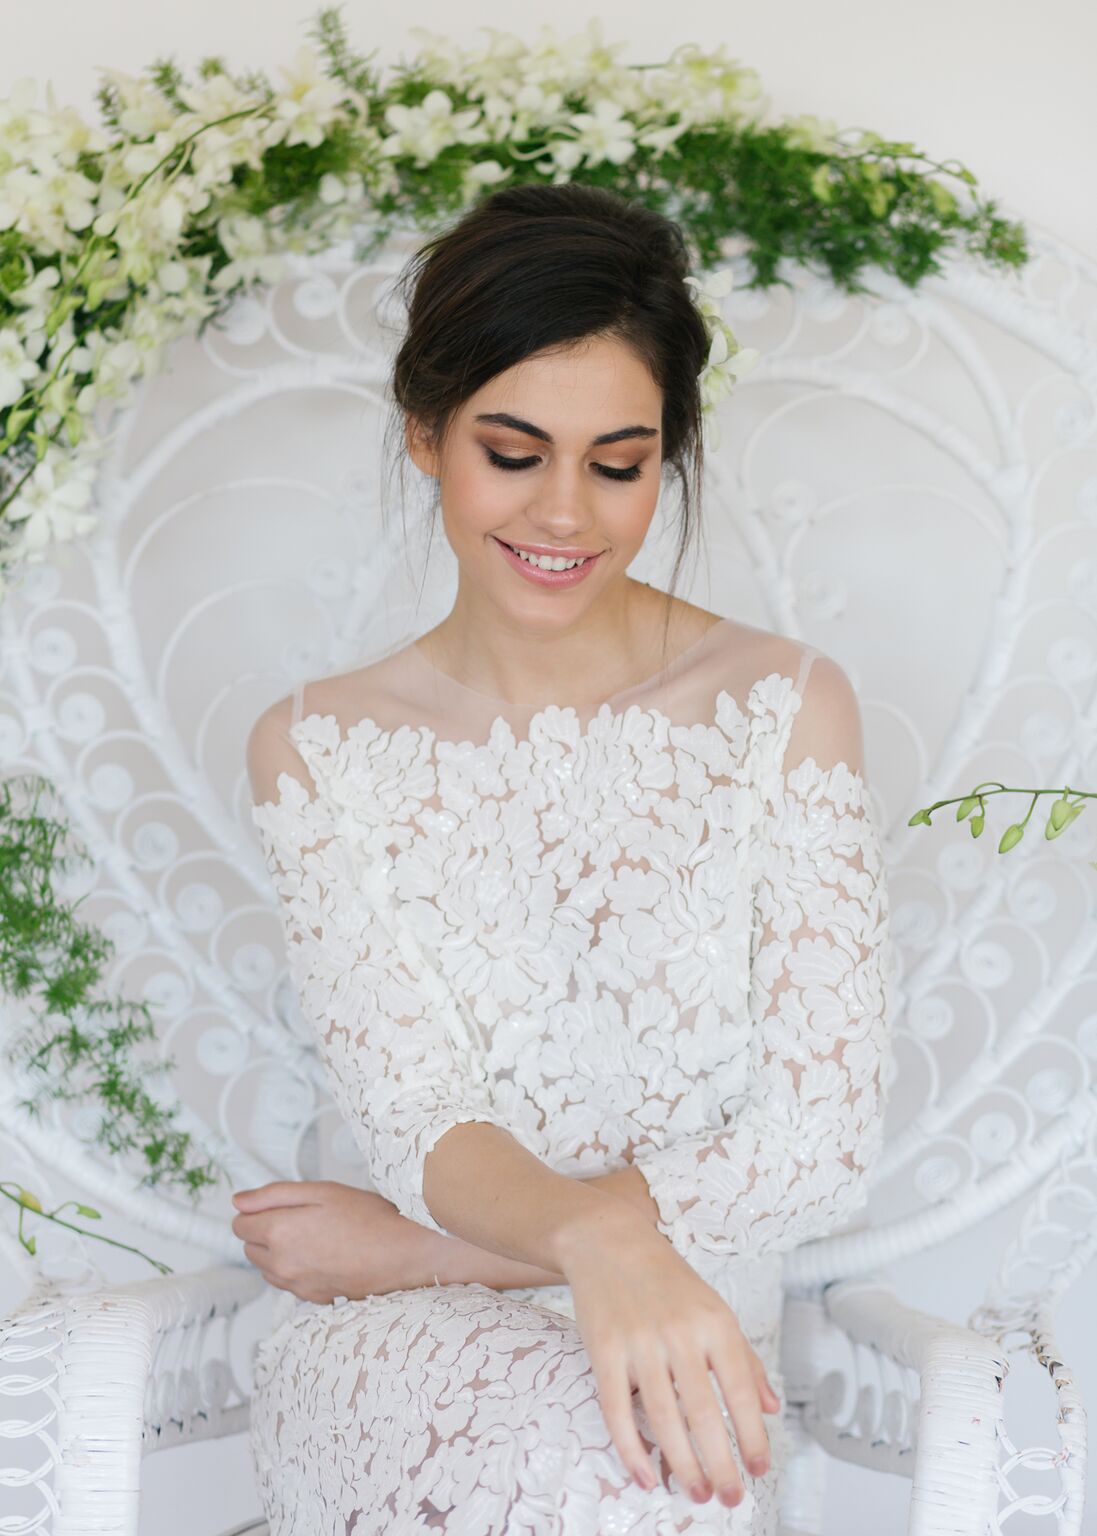 White-wedding-flowers-by-julia-rose-babalou-kingscliff-peacock-chair-lace-.jpg